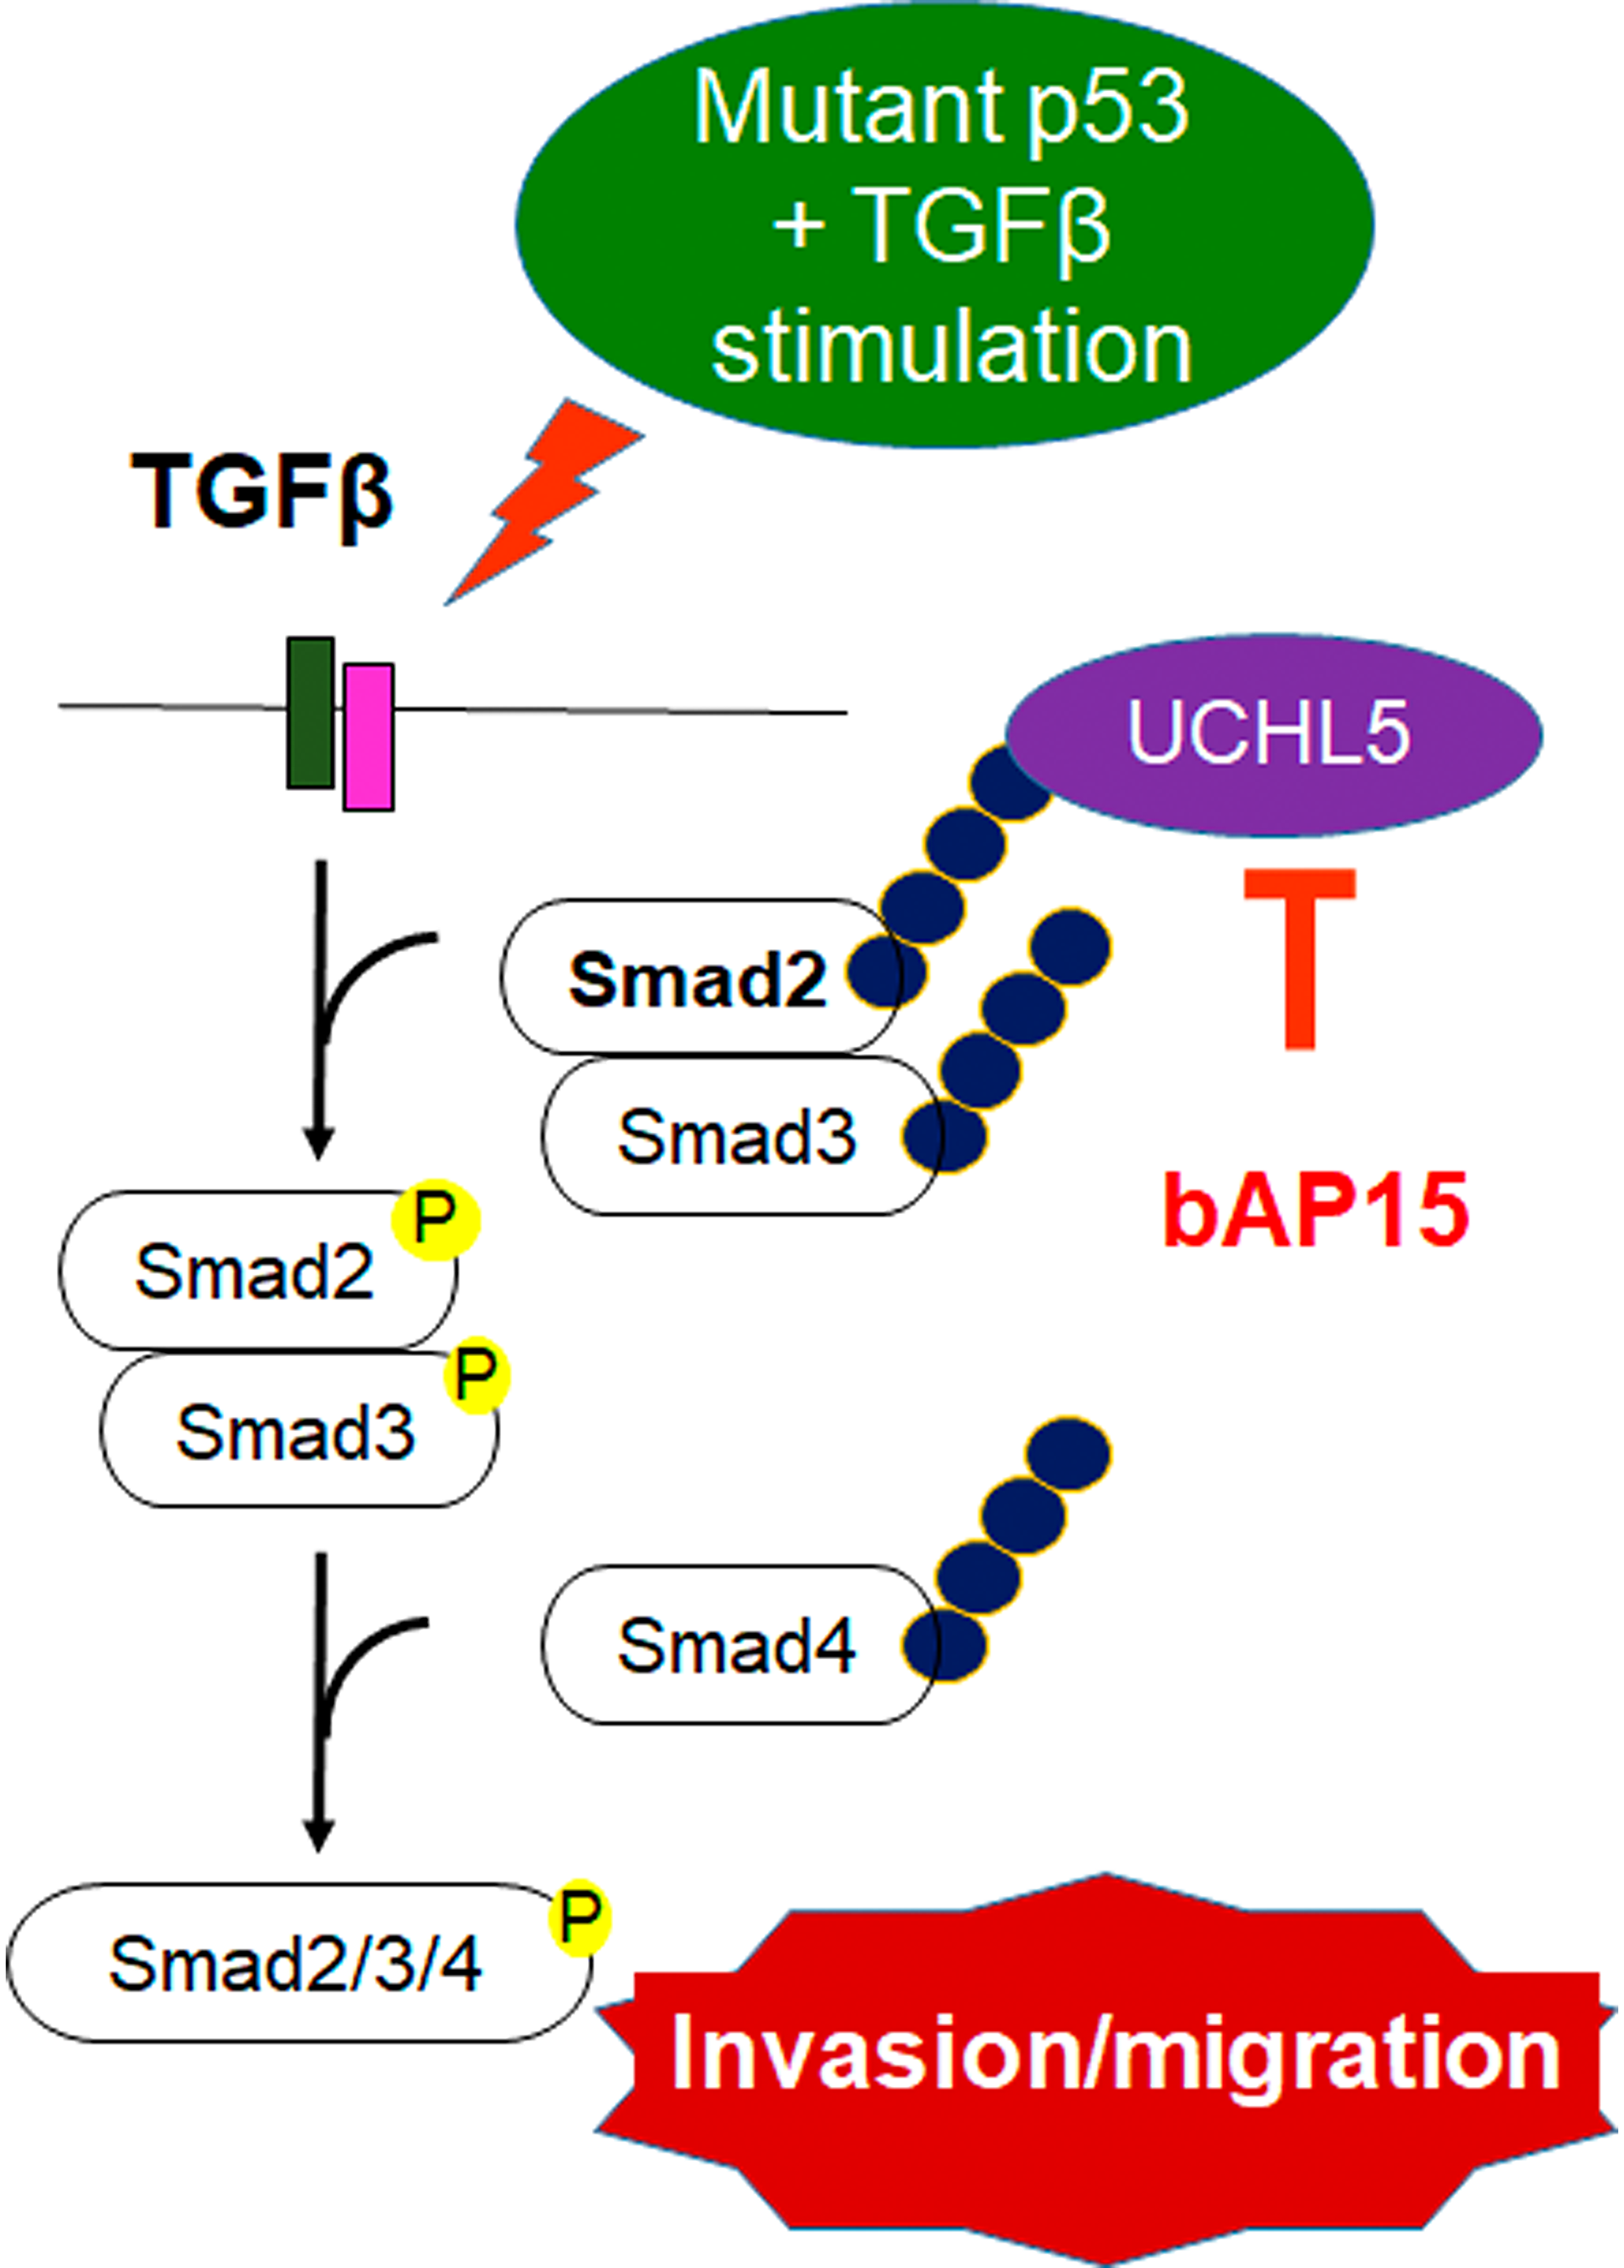 bAP15 inhibits the stabilization of Smad2/3 and aberrant TGF-β signaling in TP53 mutant ovarian cancer.